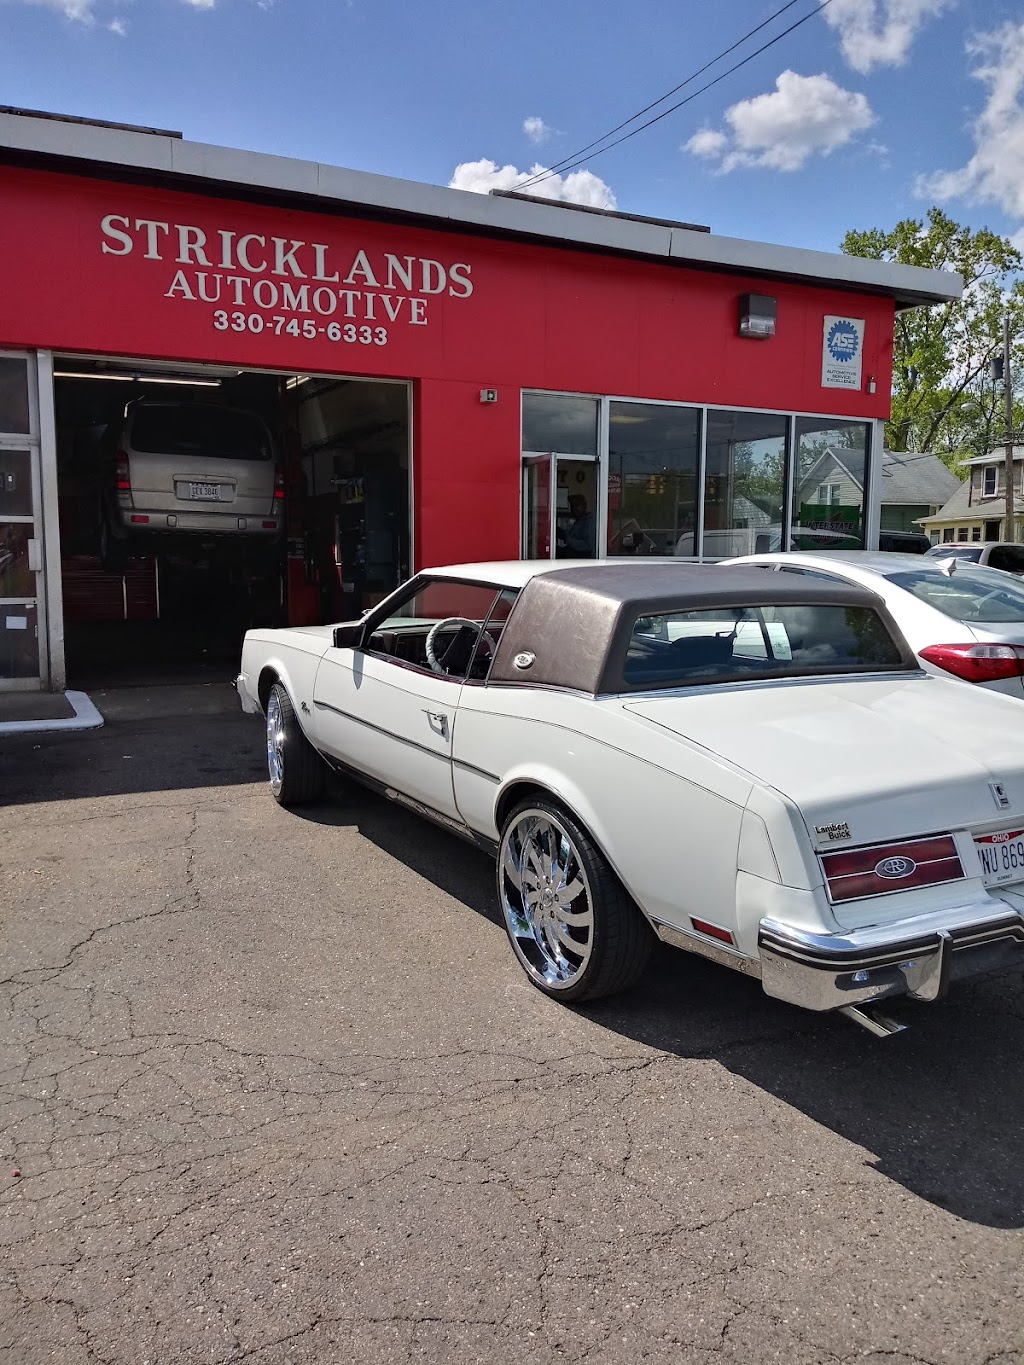 Stricklands Automotive | 2110 East Ave, Akron, OH 44314 | Phone: (330) 745-6333